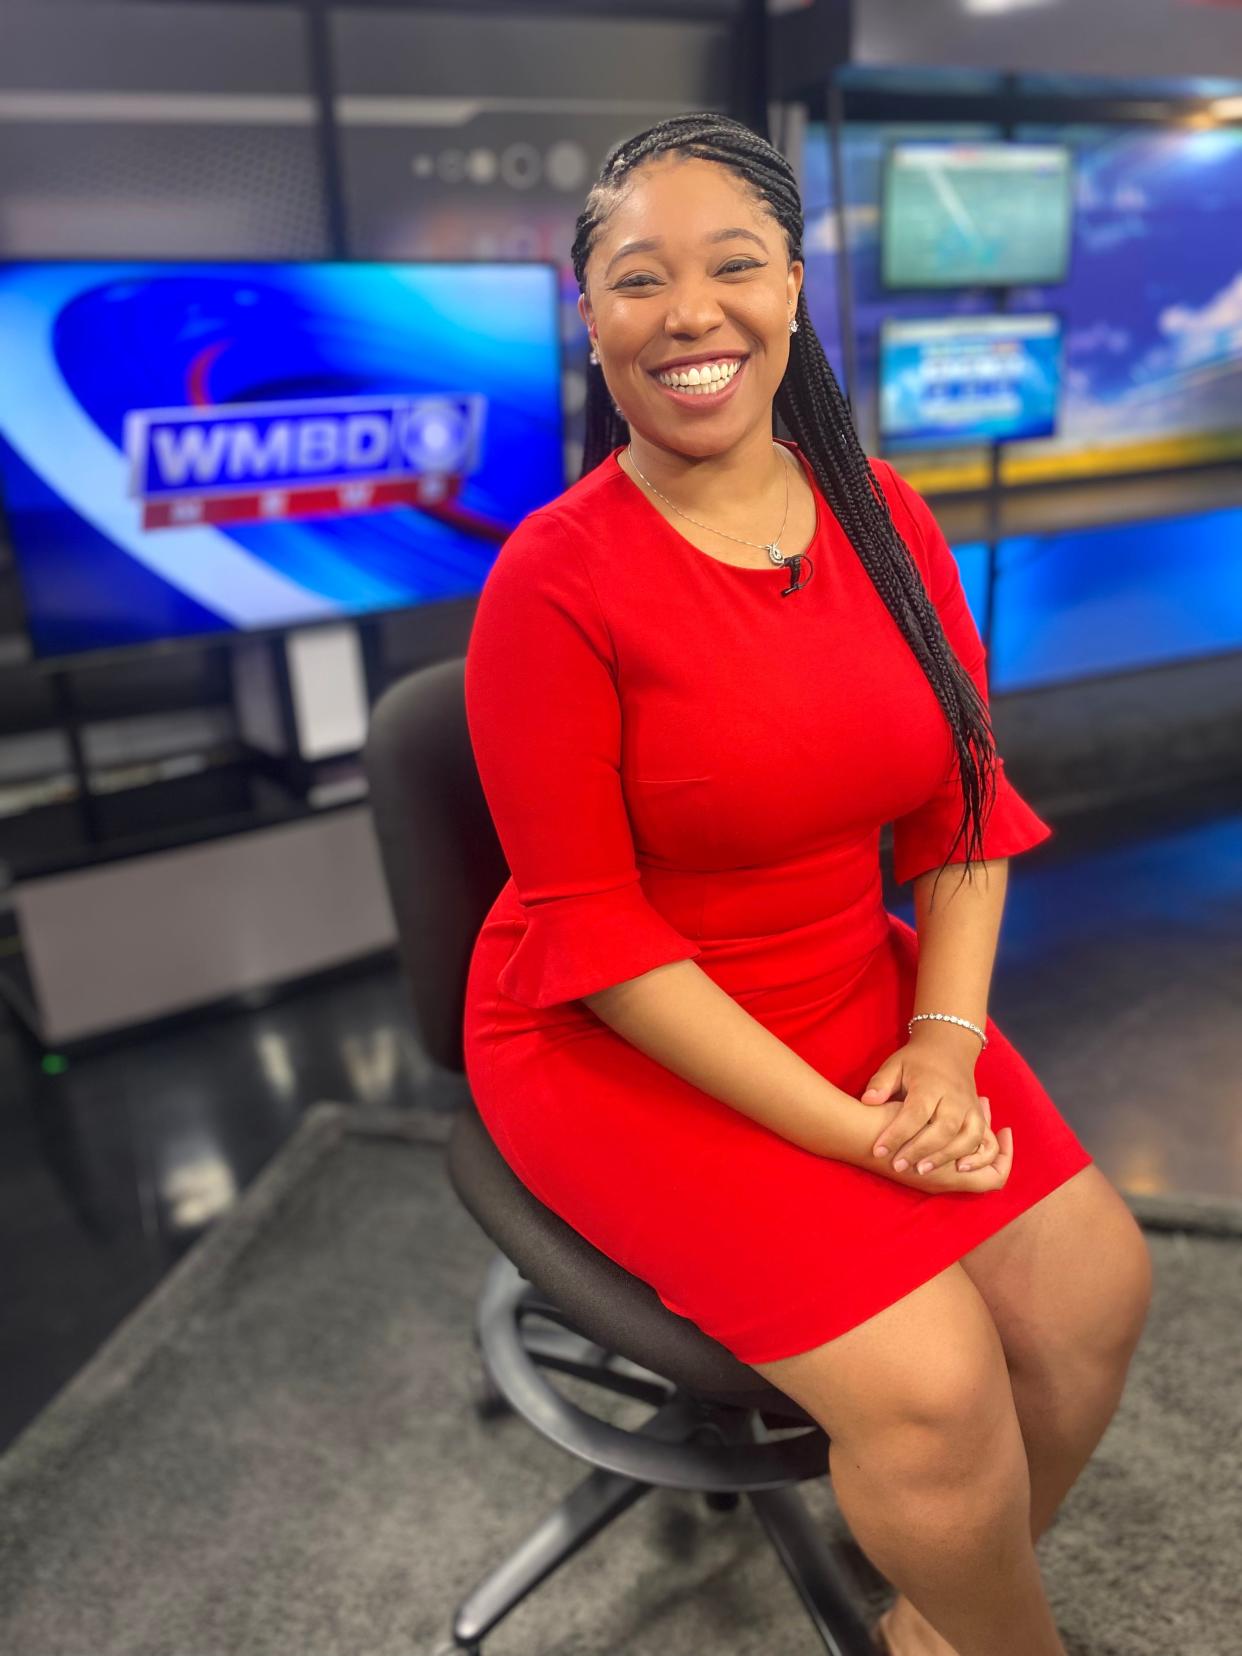 After five and a half years with WMBD-TV, Shelbey Roberts left at the end of May.